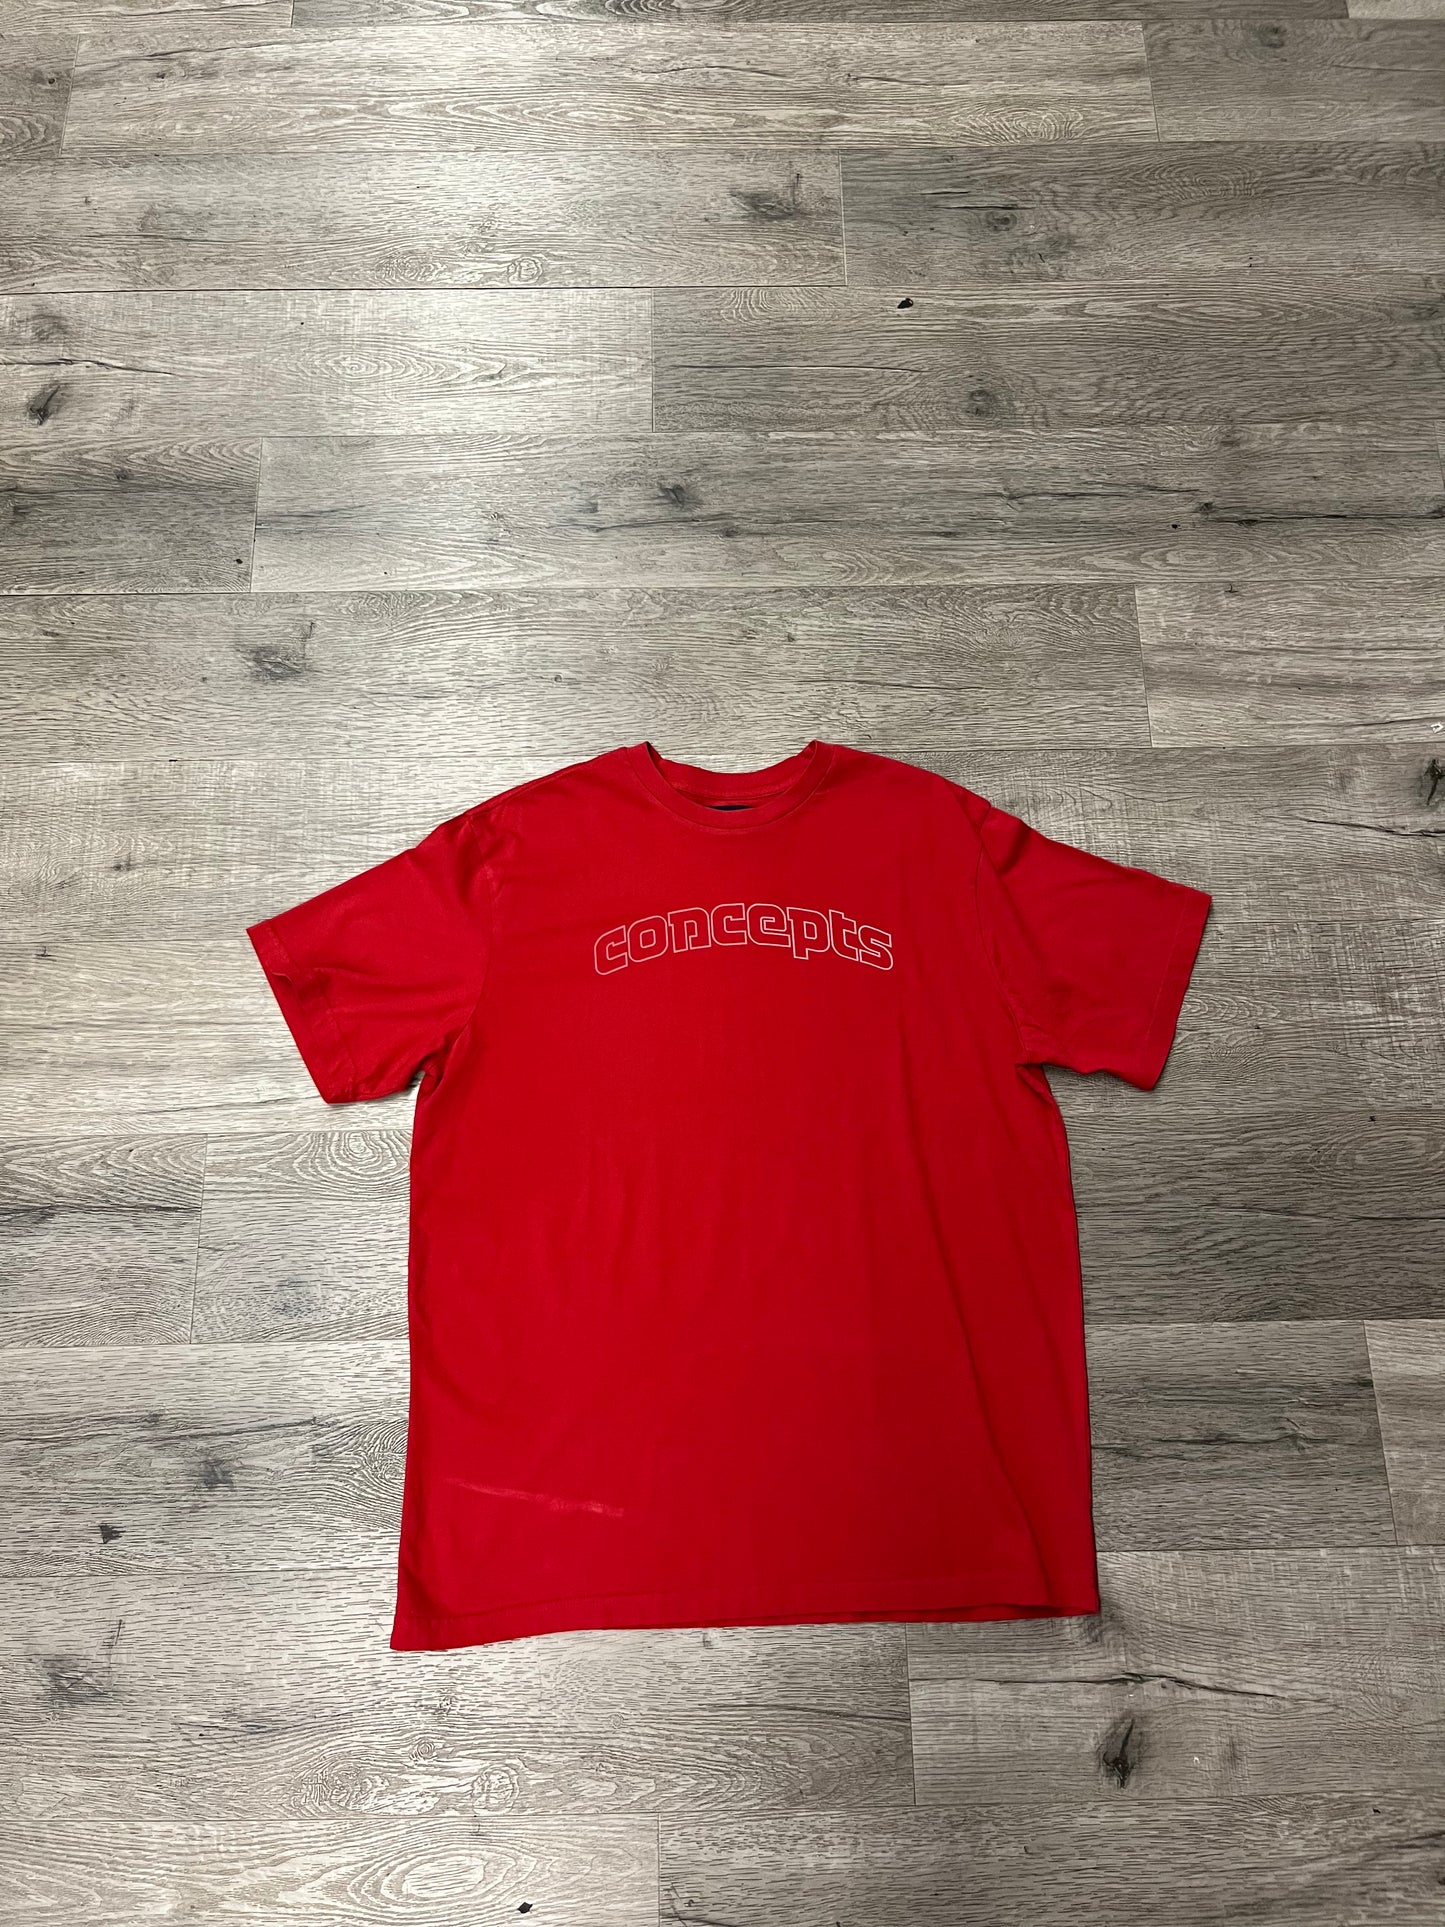 Concepts Red Lobster Tee